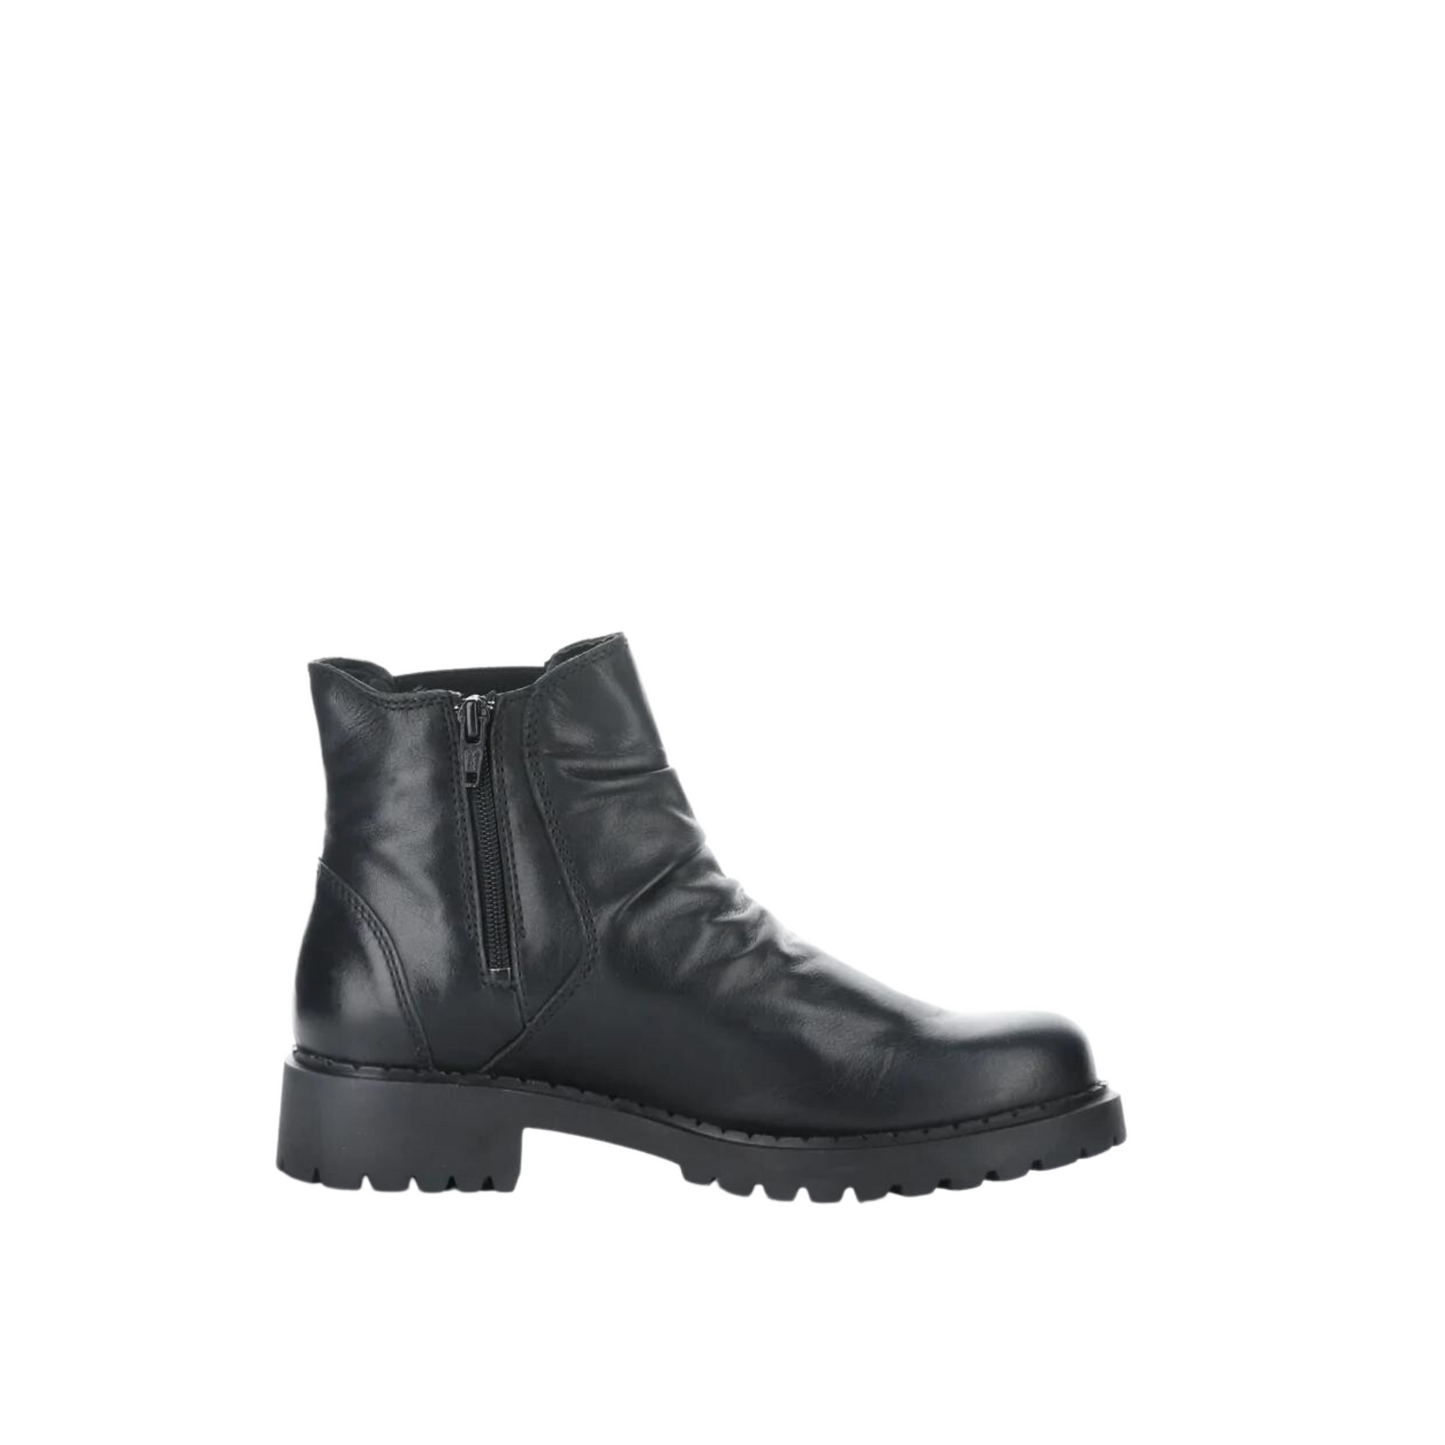 Right side profile of the Bos & Co Barb Boot in the colour Black.